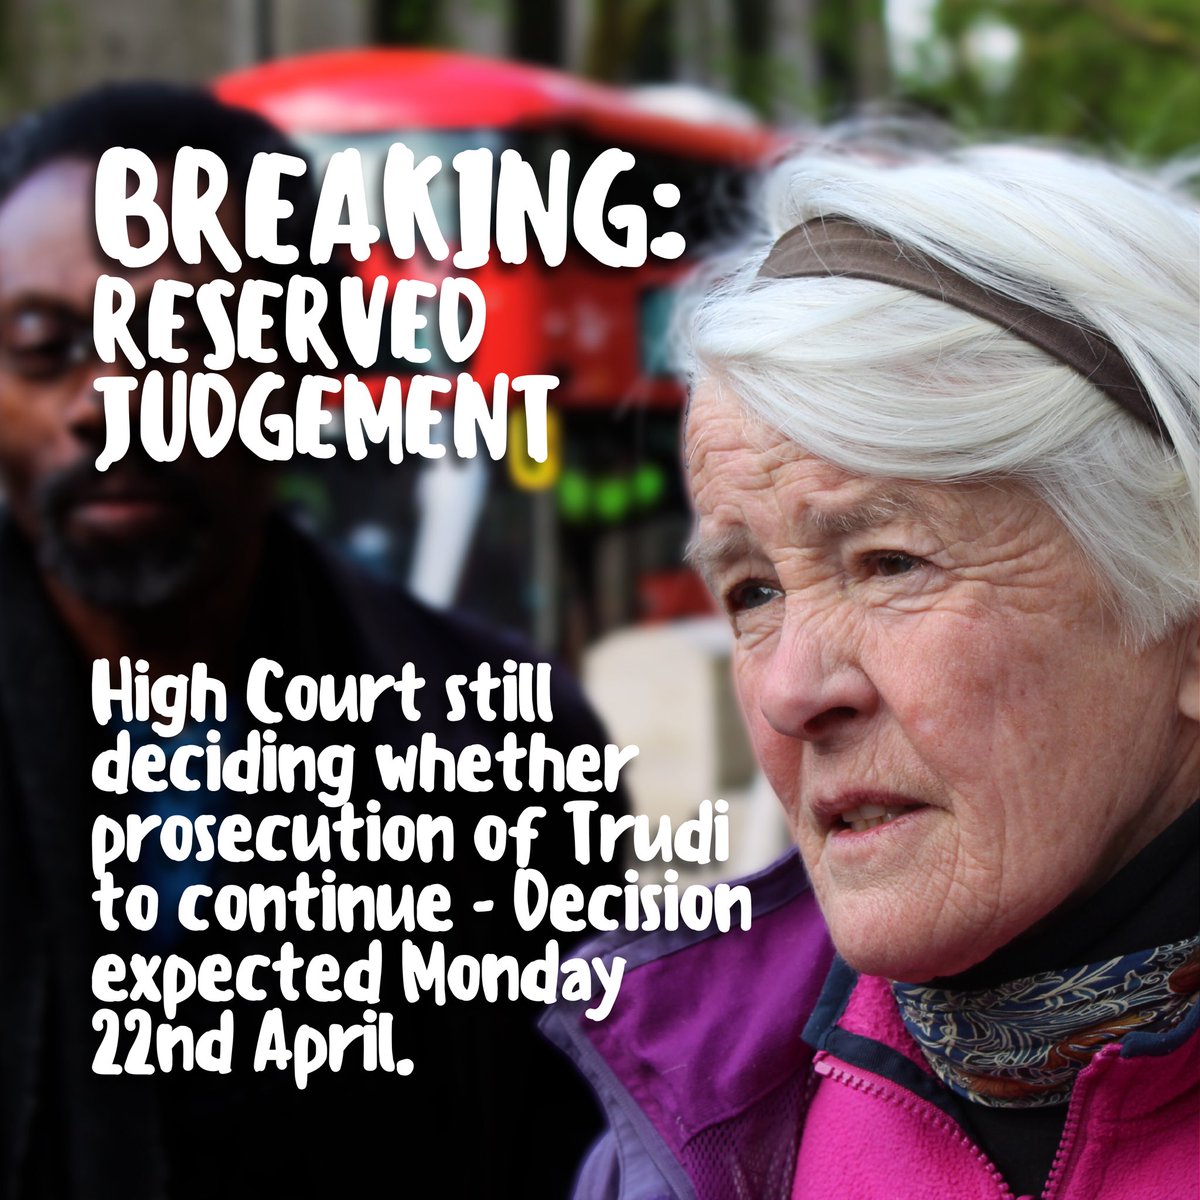 BREAKING: TRUDI WARNER HEARING The High Court has reserved judgment, meaning they are still deciding whether to prosecute Trudi or not. A decision is expected to be made on Monday 22nd April. #IAmTrudiWarner #ProsecuteMeToo #WeAreAllTrudiWarner #DefendOurJuries